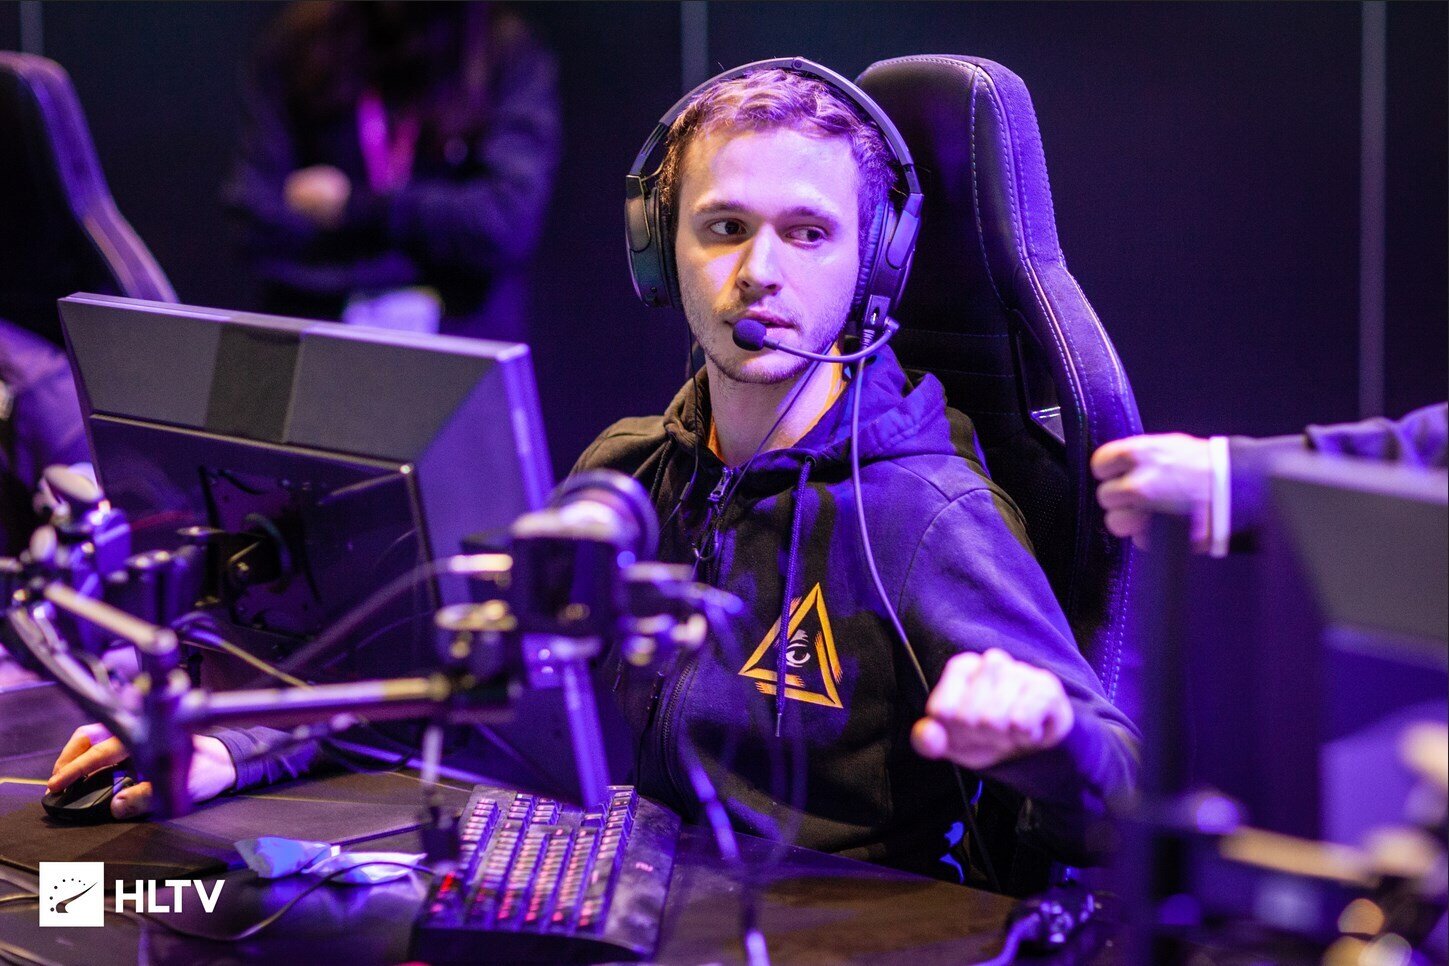 GODSENT have taken first place in a group with mousesports, Fnatic, and G2 Esports (Photo via HLTV)